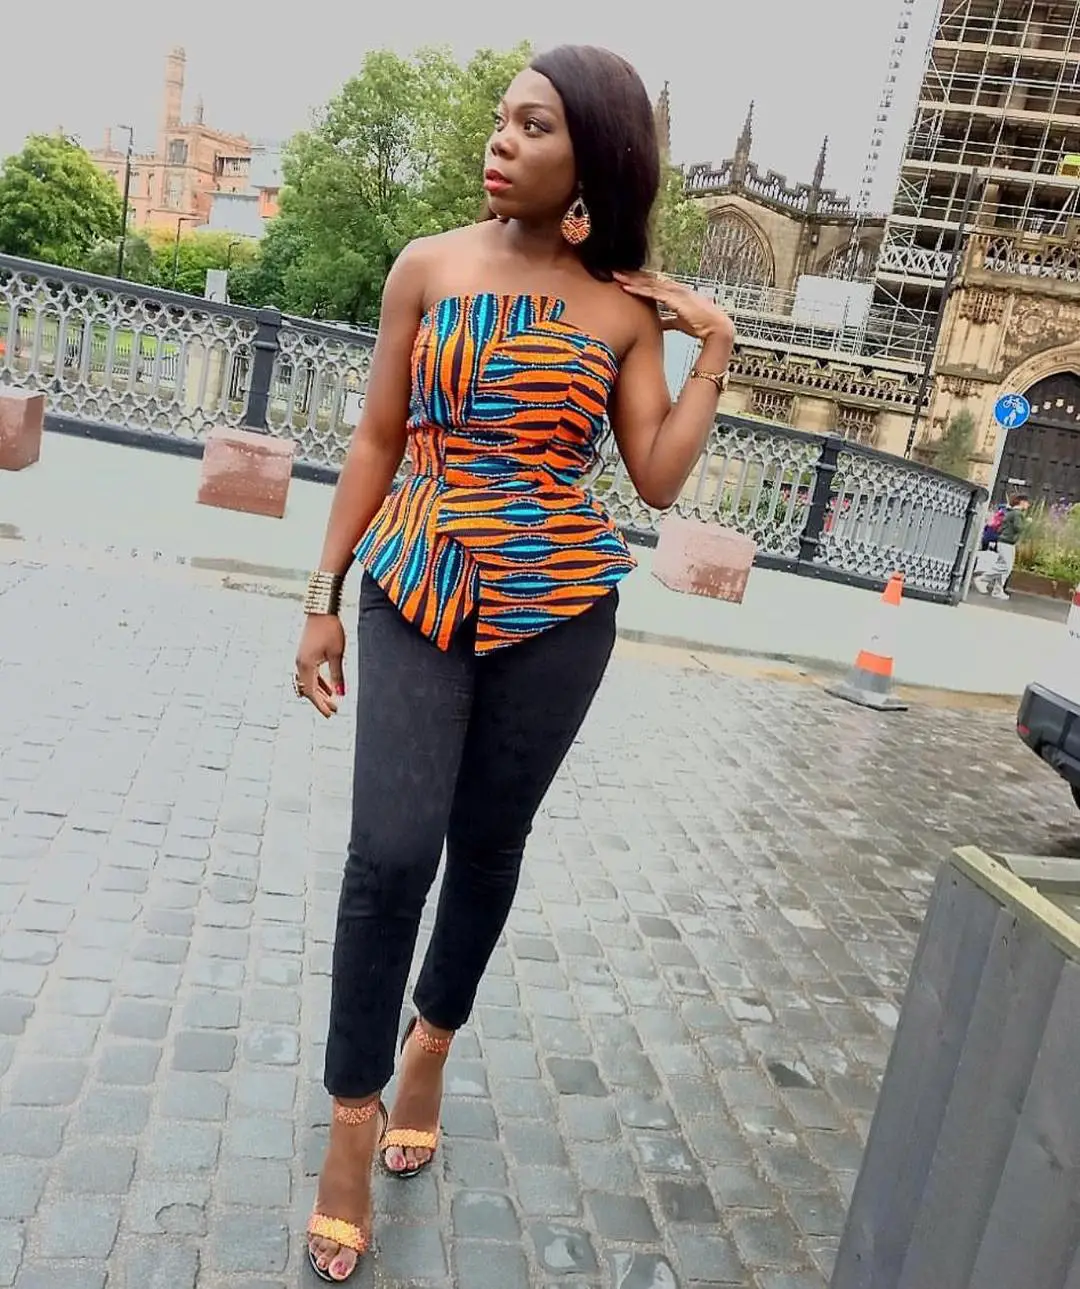 Glide Into The Weekend In Chic Ankara Top Styles